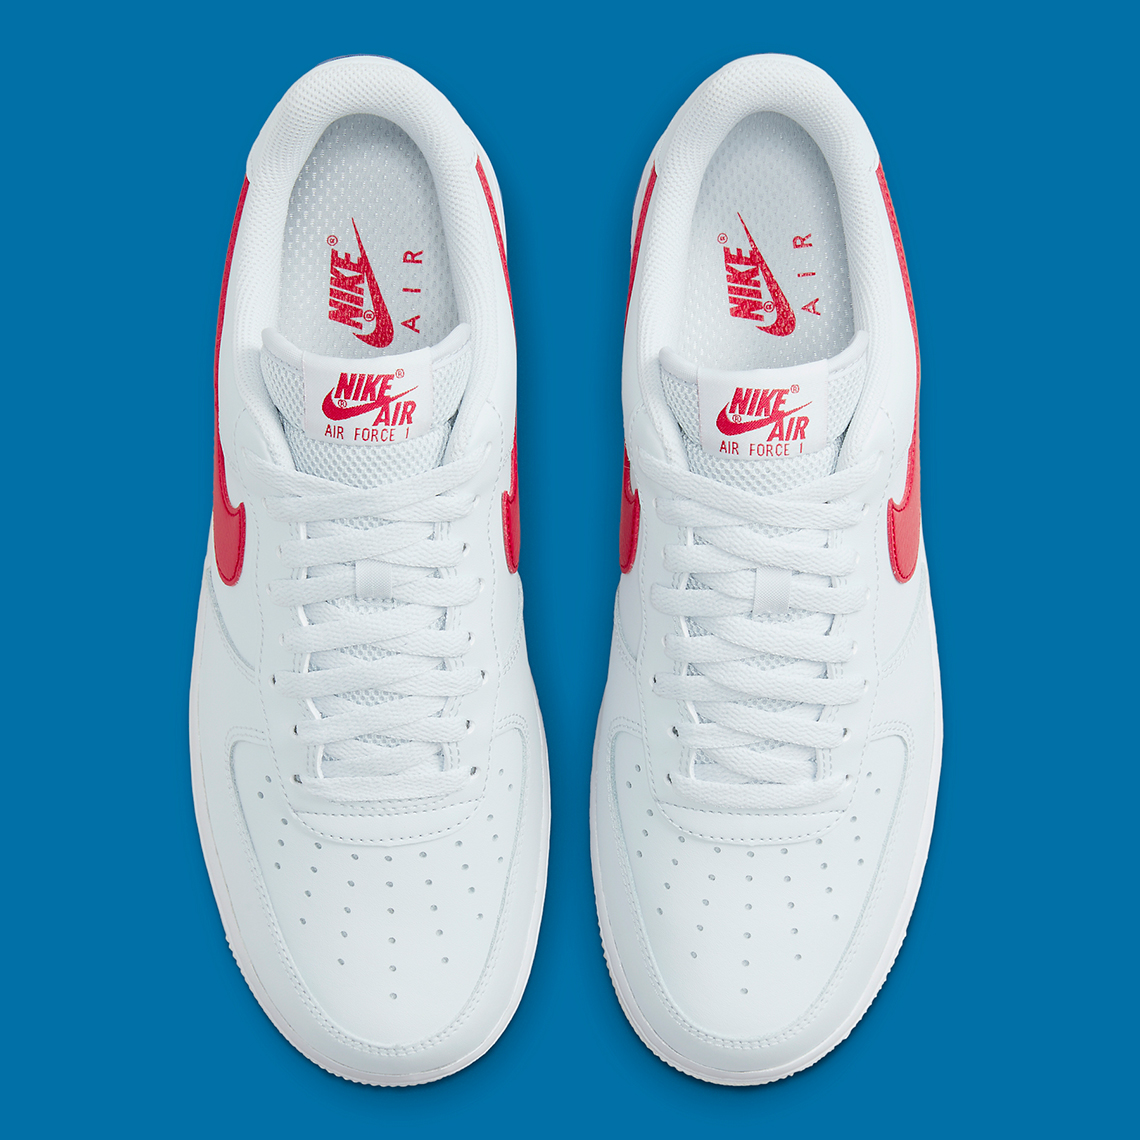 Nike Air Force 1 Red White Blue Dx2660 001 5 1